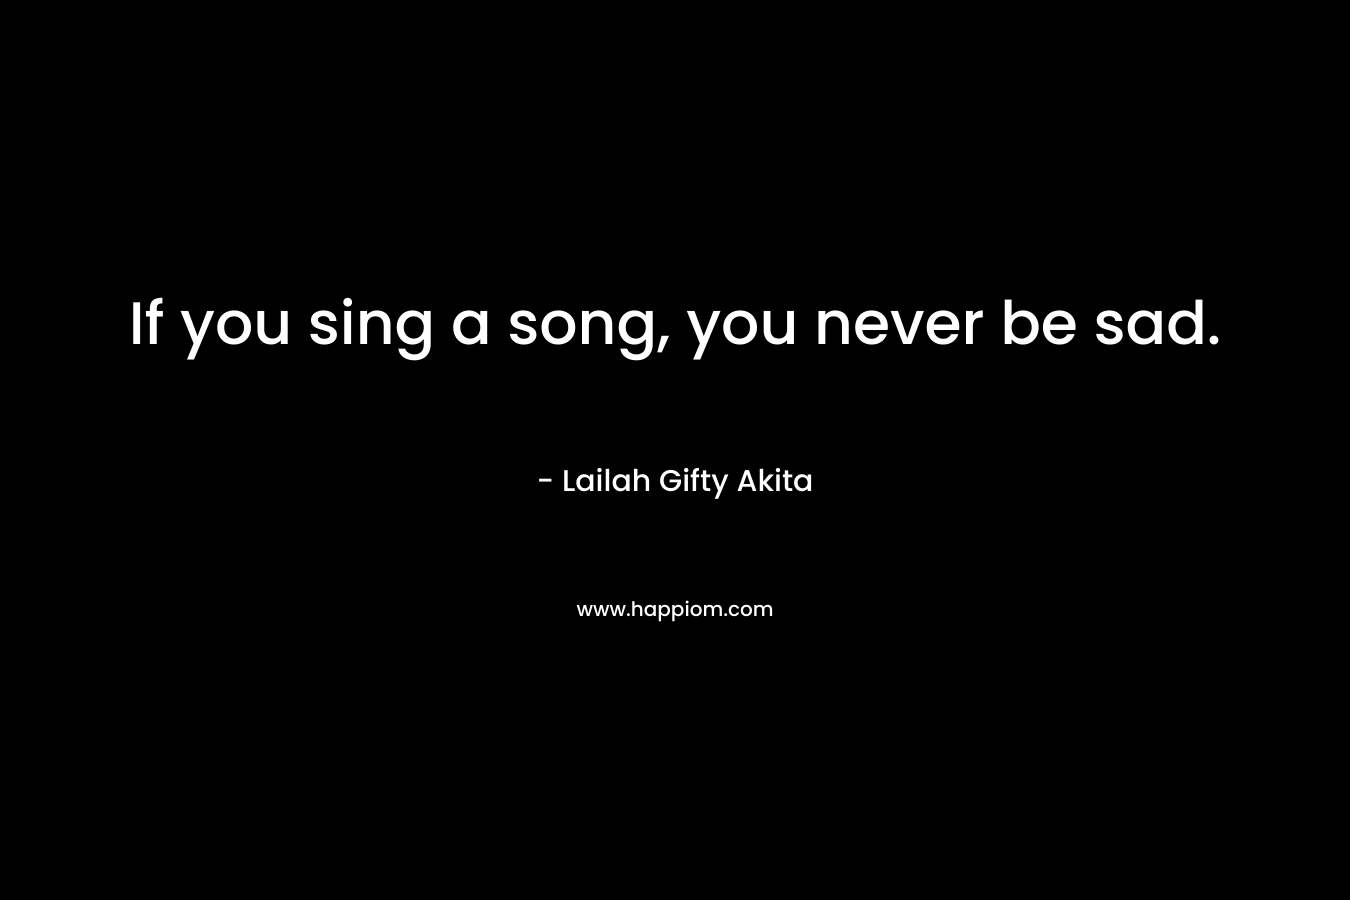 If you sing a song, you never be sad.